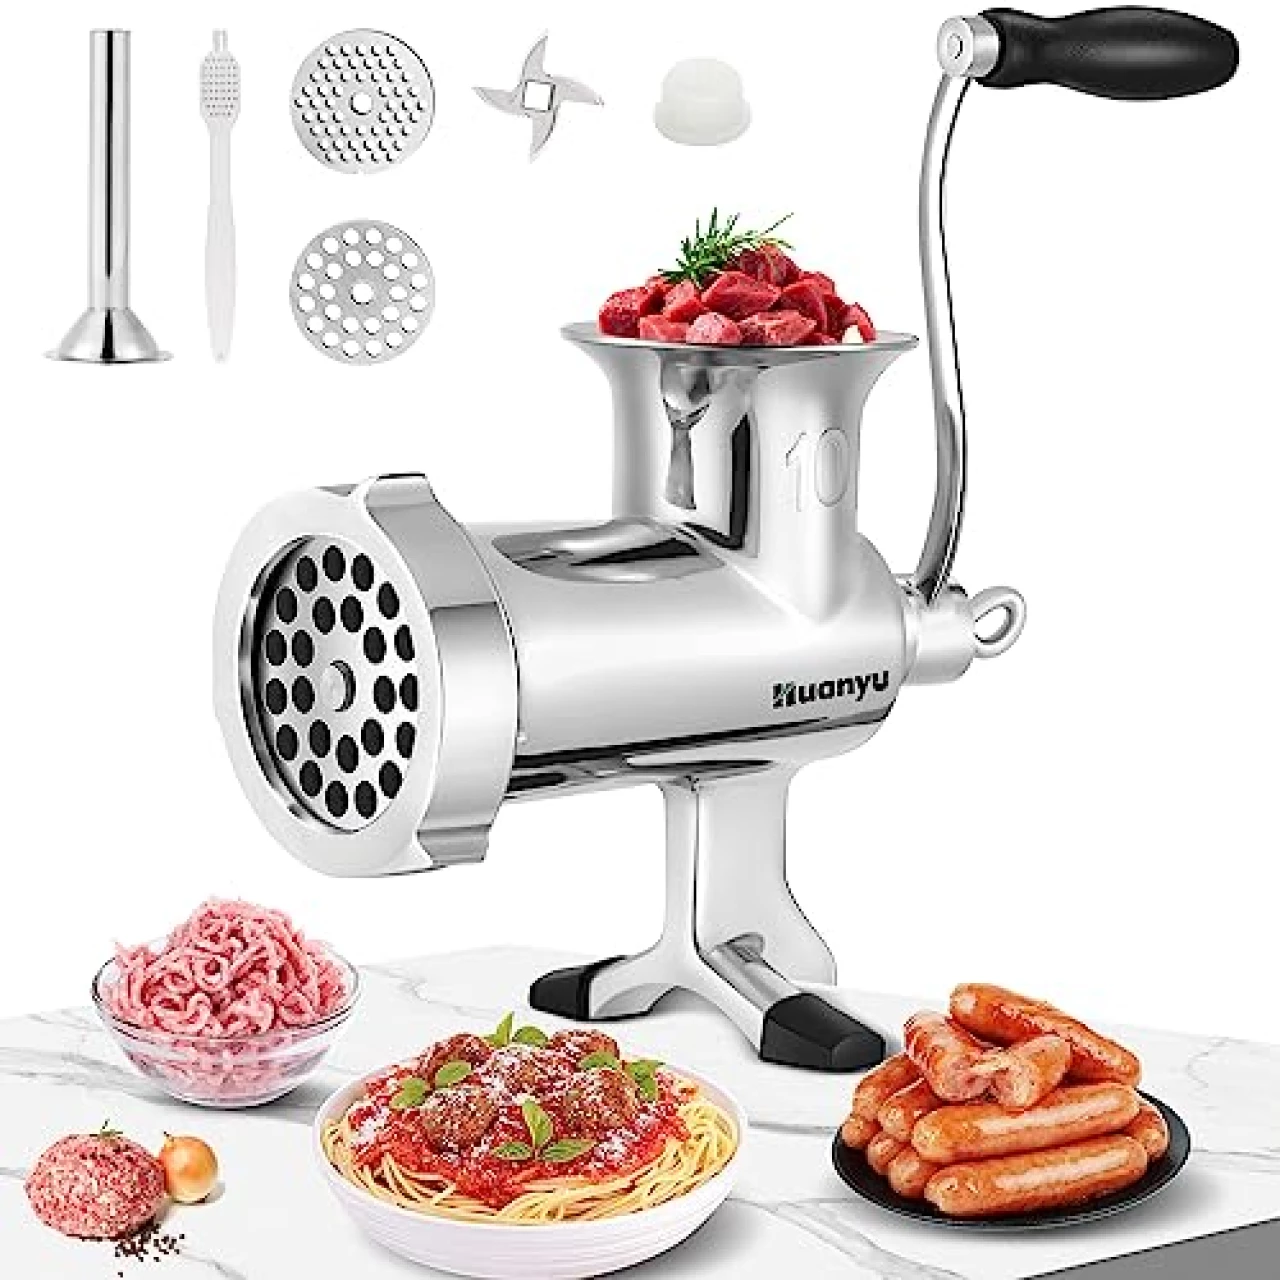 Huanyu Meat Grinder Manual Stainless Steel Meat Mincer Sausage Stuffer Filler Handheld Meat Ginding Machine